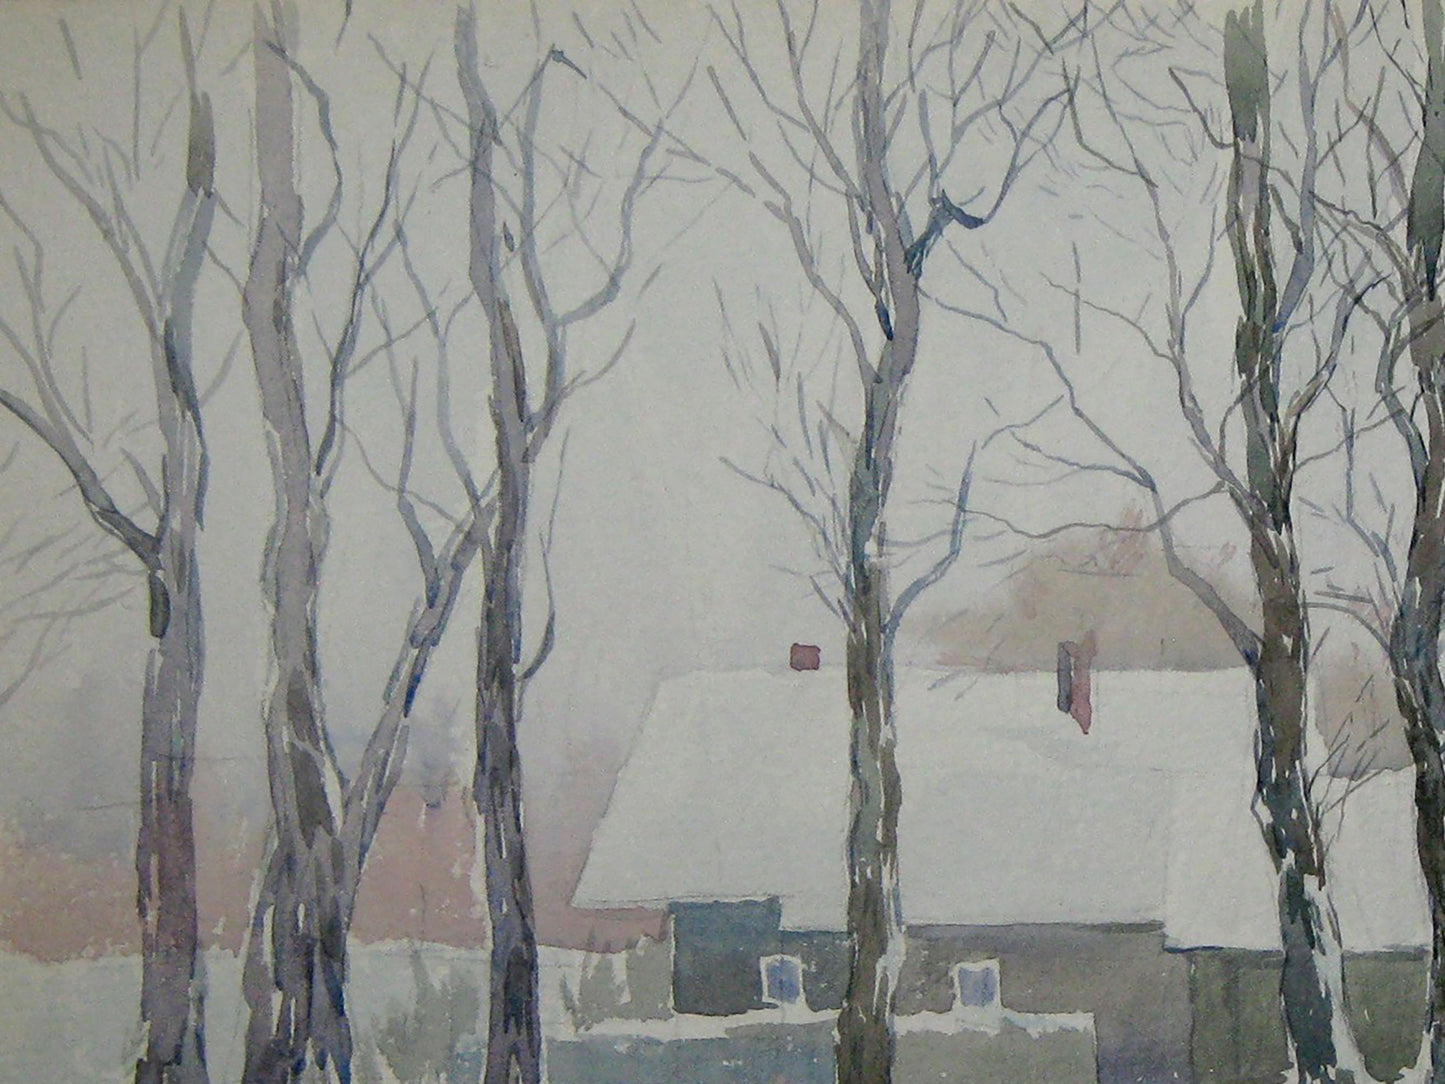 Watercolor painting The first snow fell Savenets Valery